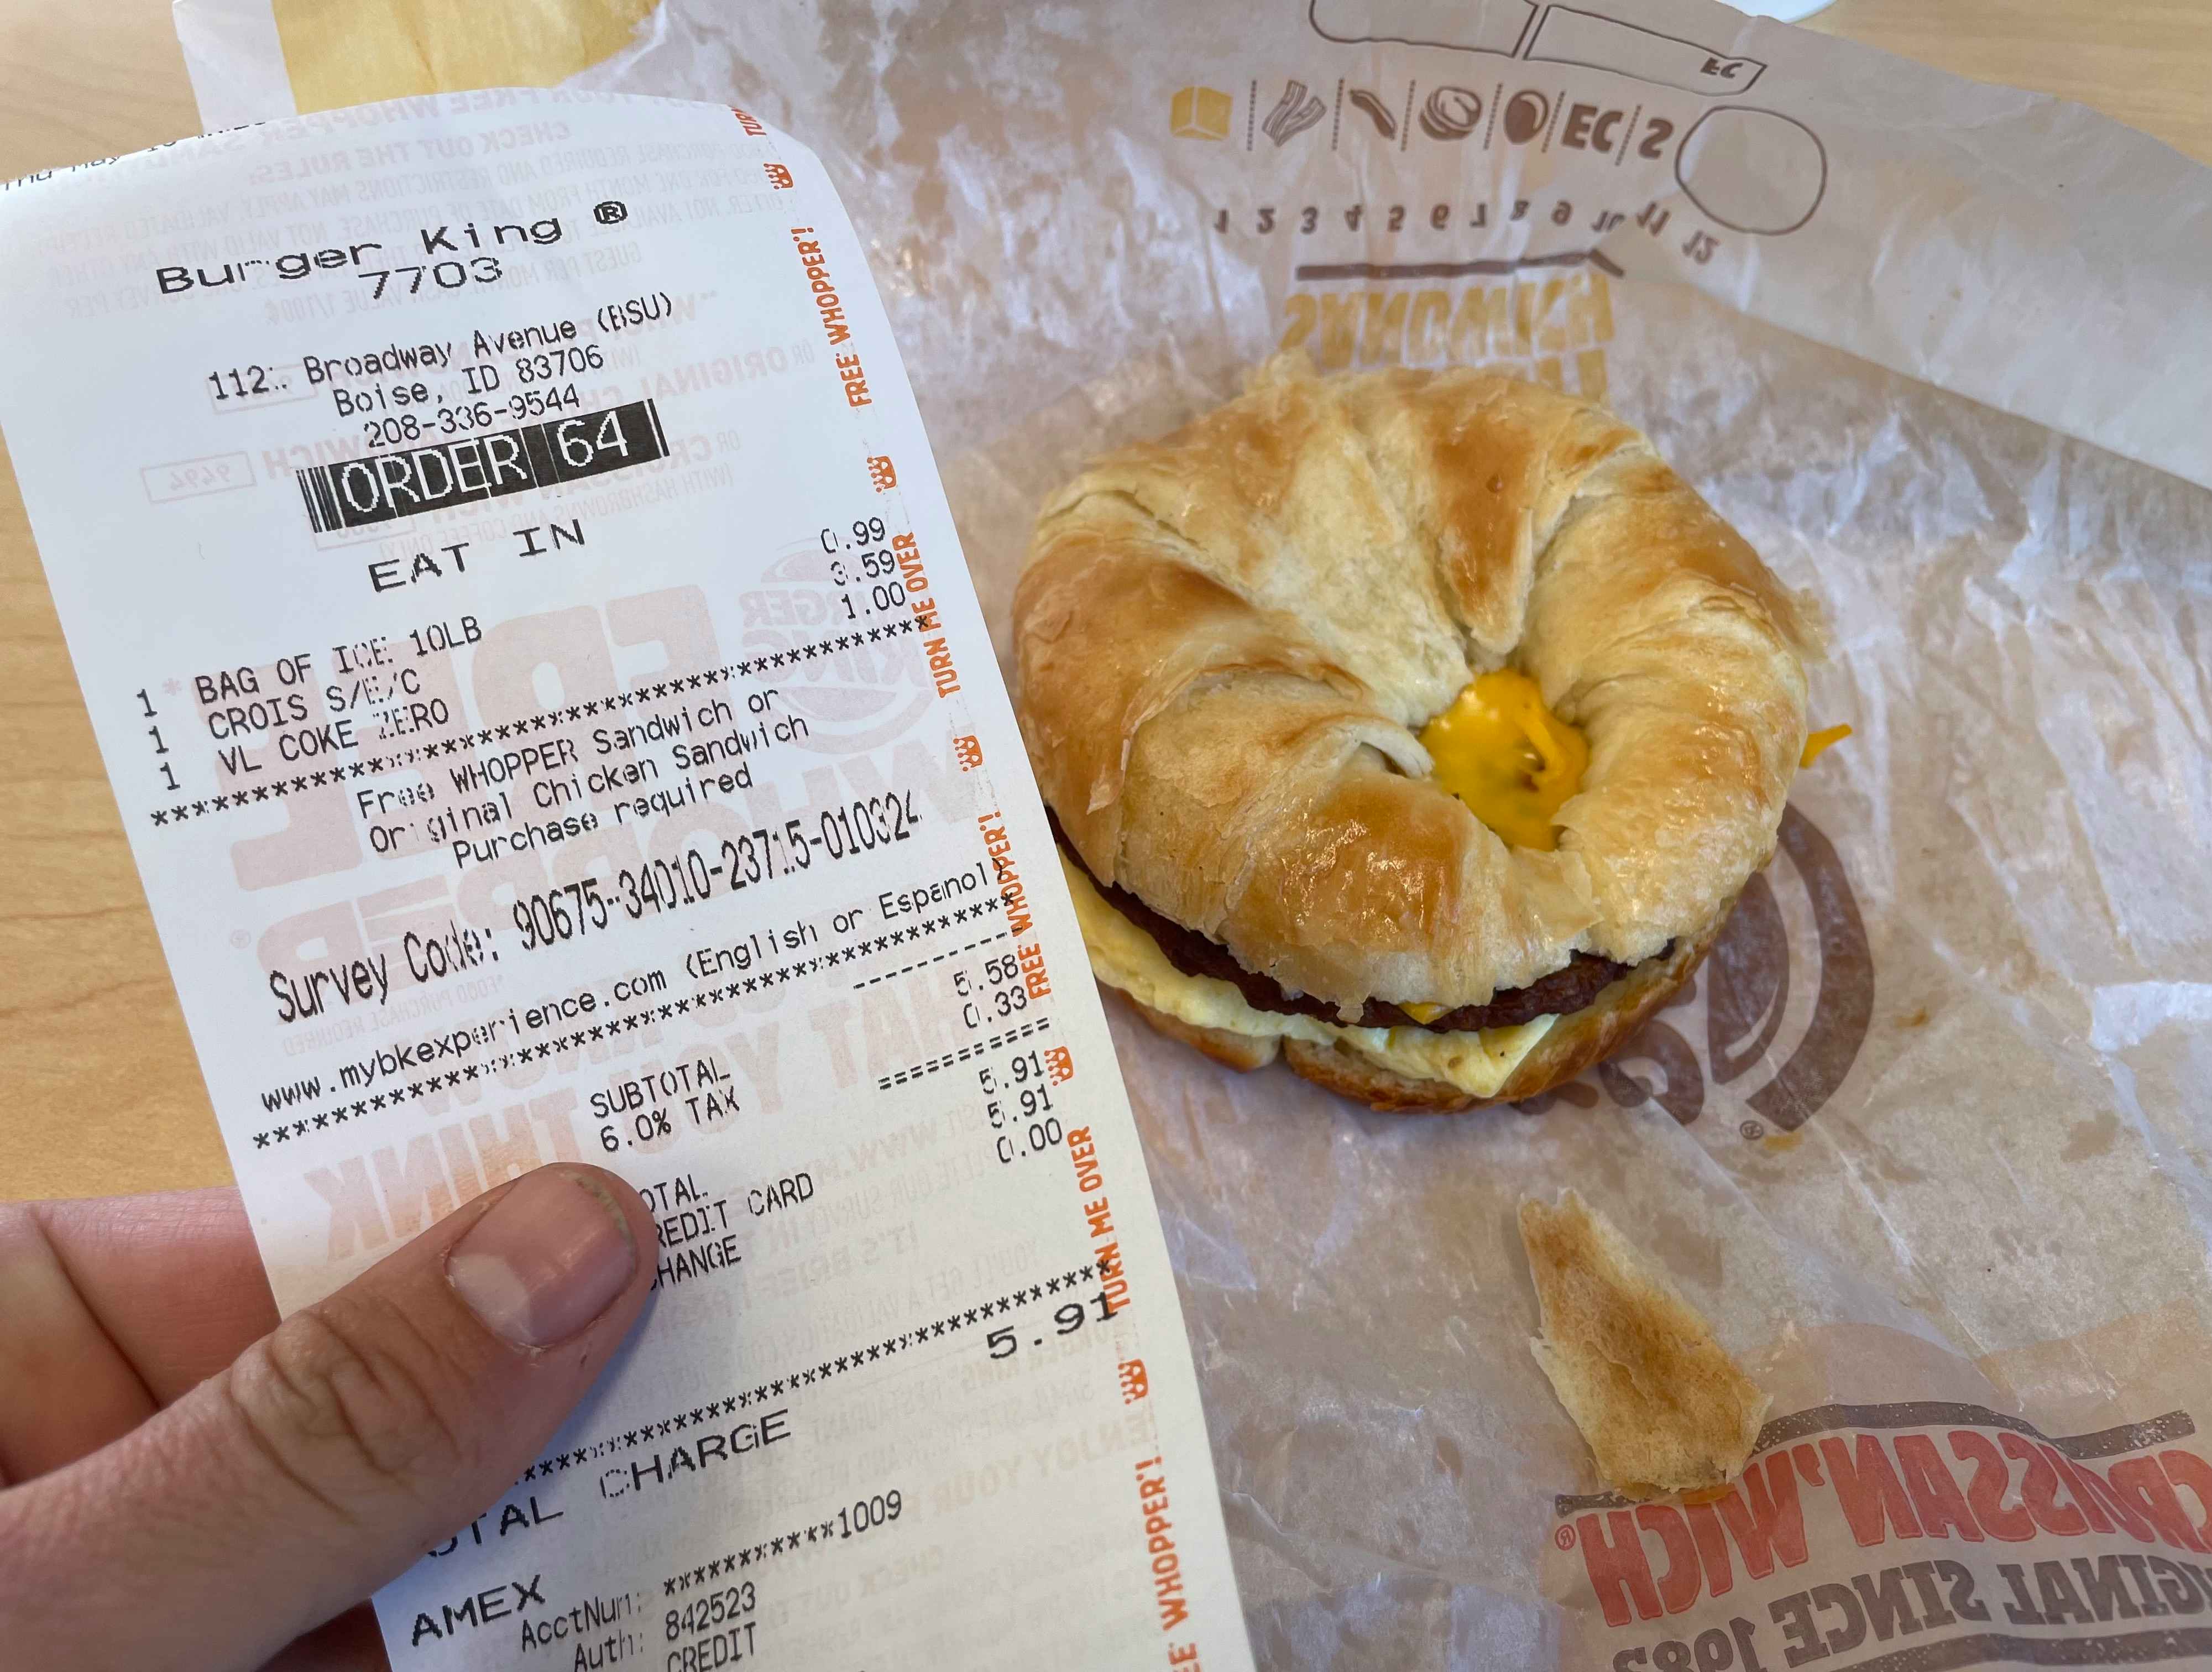 A person holding a burger king receipt.